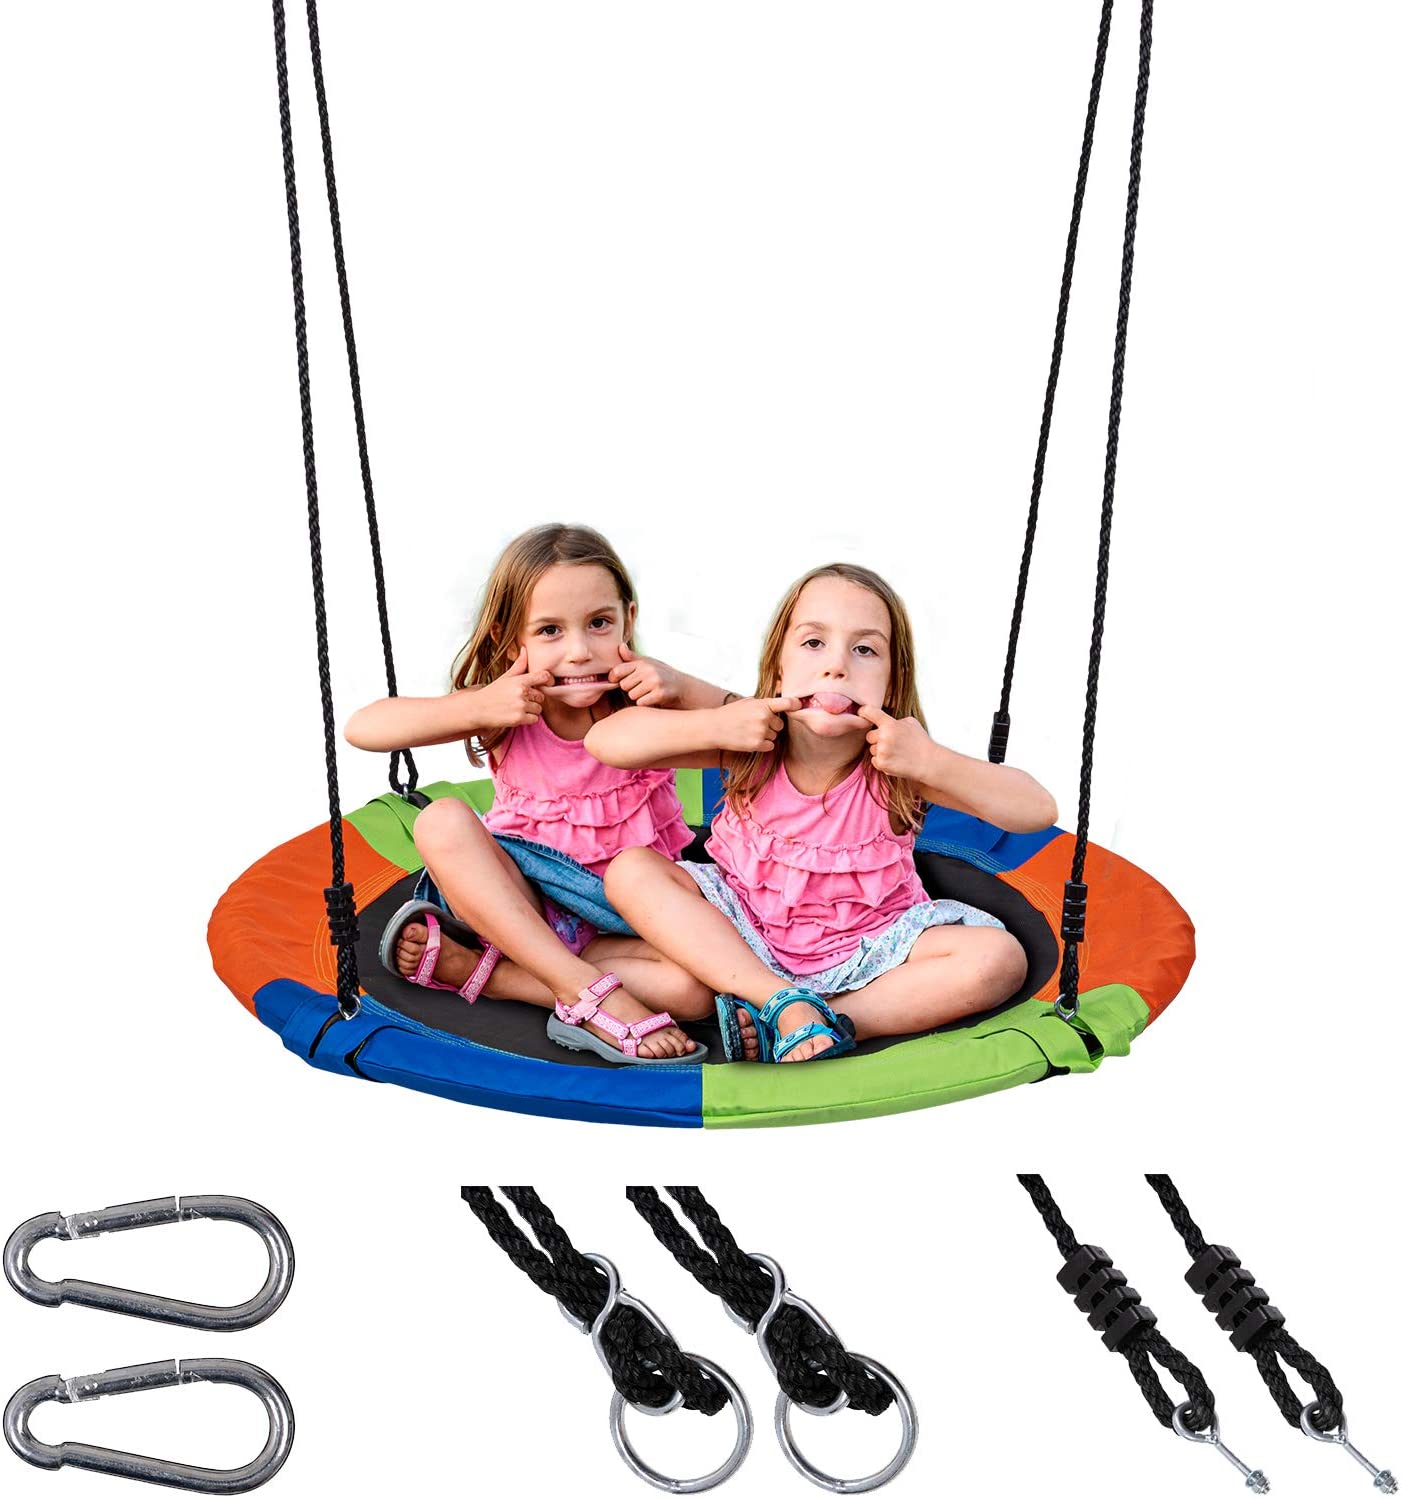 40 Inch Kids Saucer Tree Swing Set 600D Heavy-Duty Oxford Fabric Platform Swing Seat with Steel Frame & Carabiner Support 550 lb